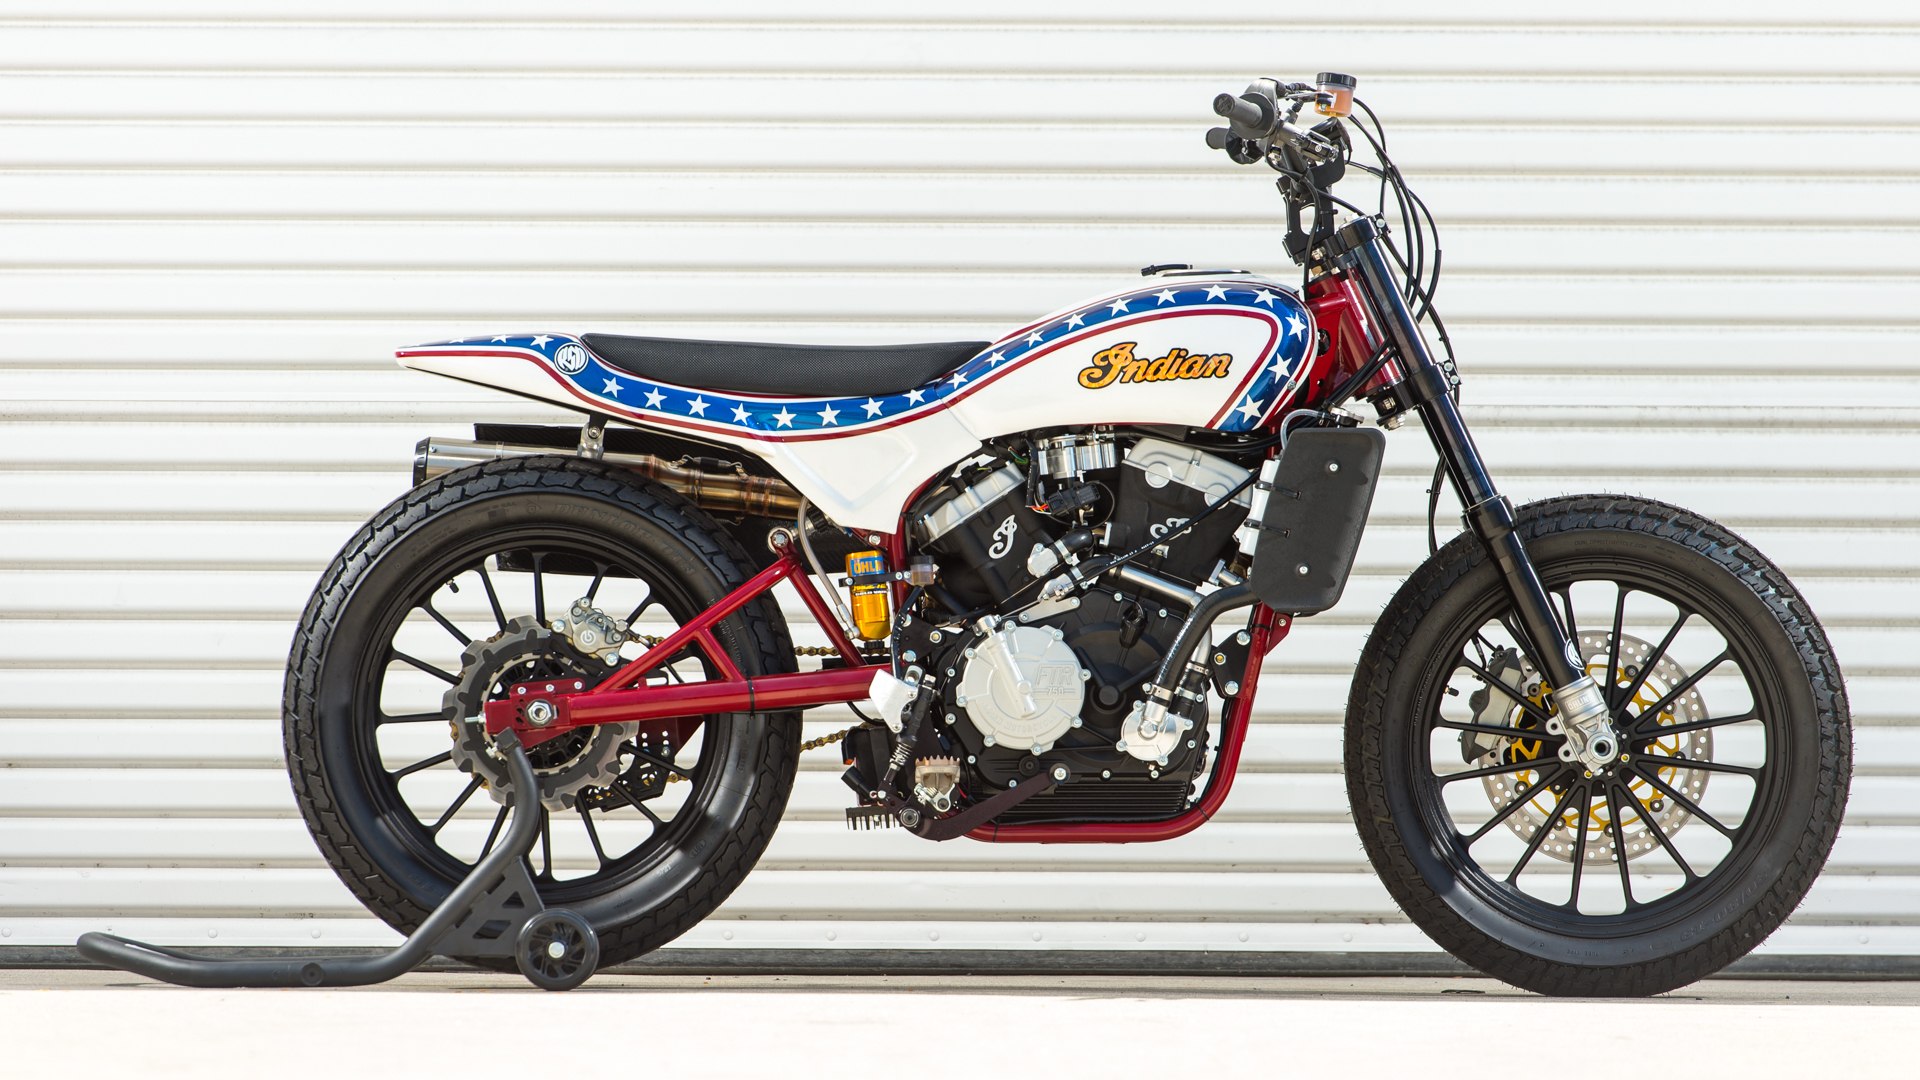 Indian Scout Ftr750 Wallpapers